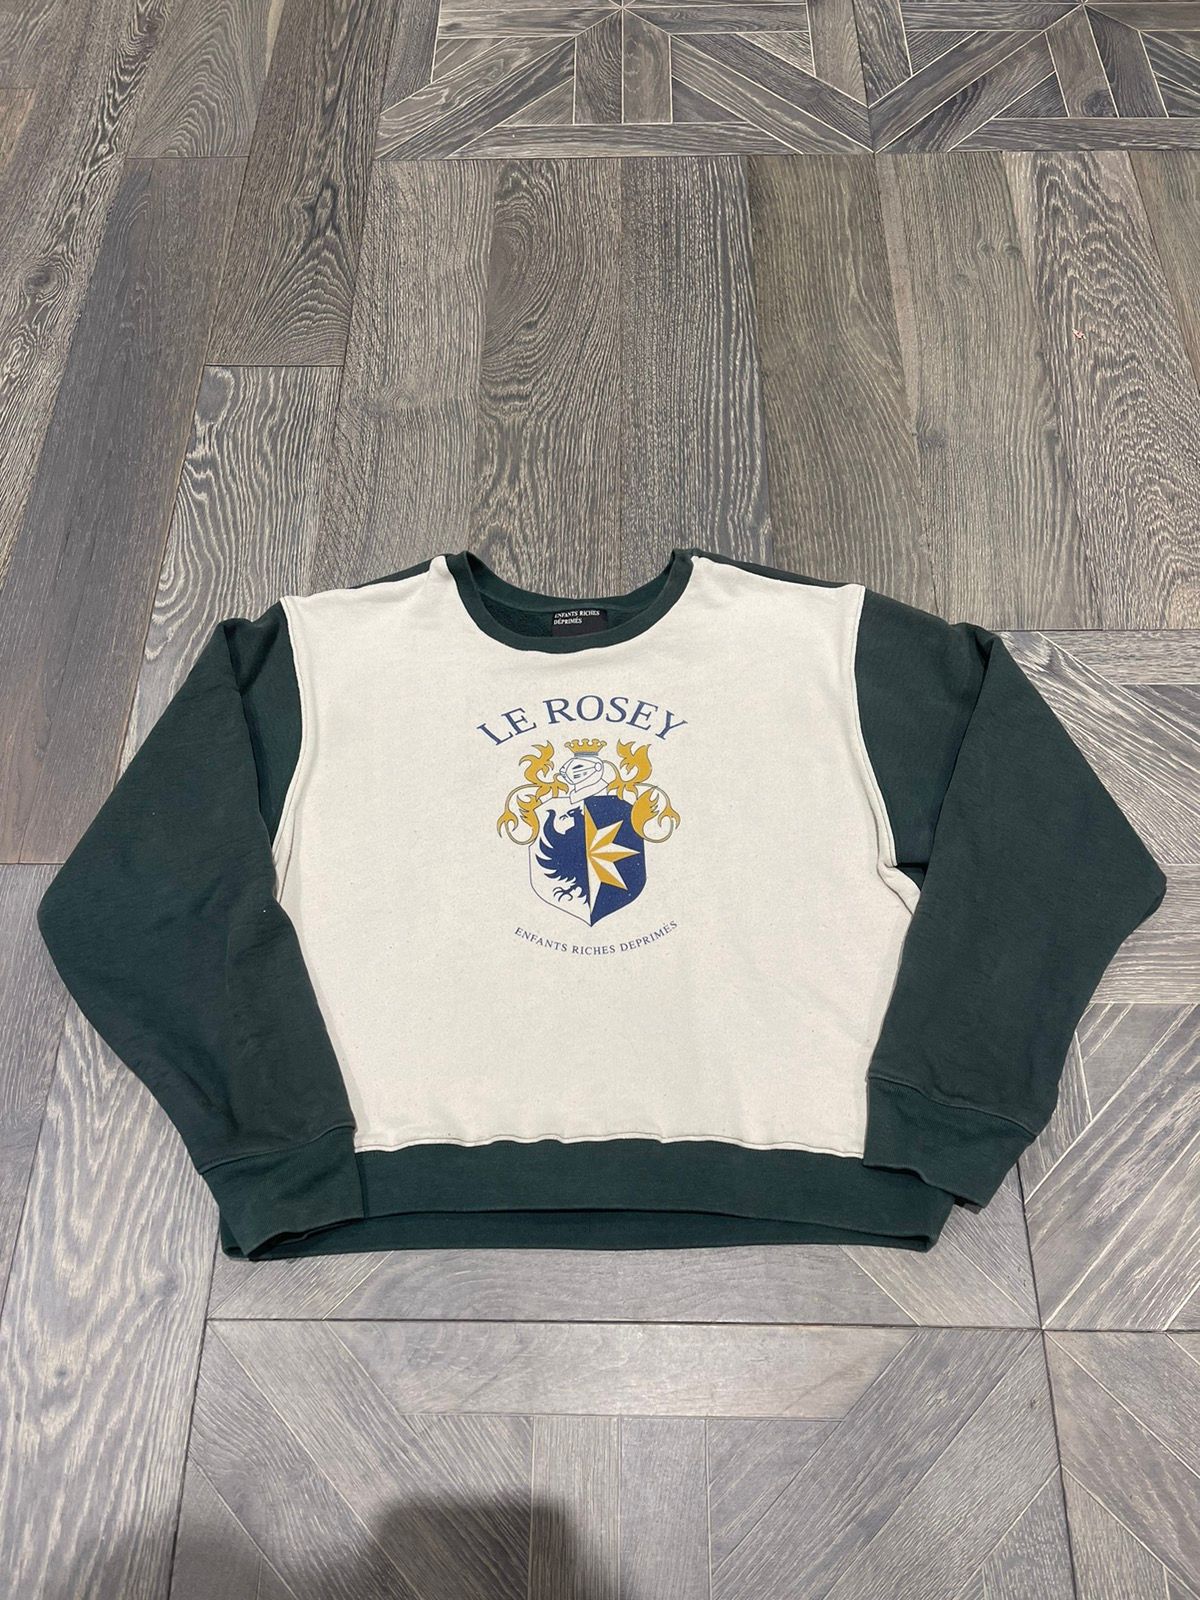 Pre-owned Enfants Riches Deprimes Le Rosey Crewneck In Green